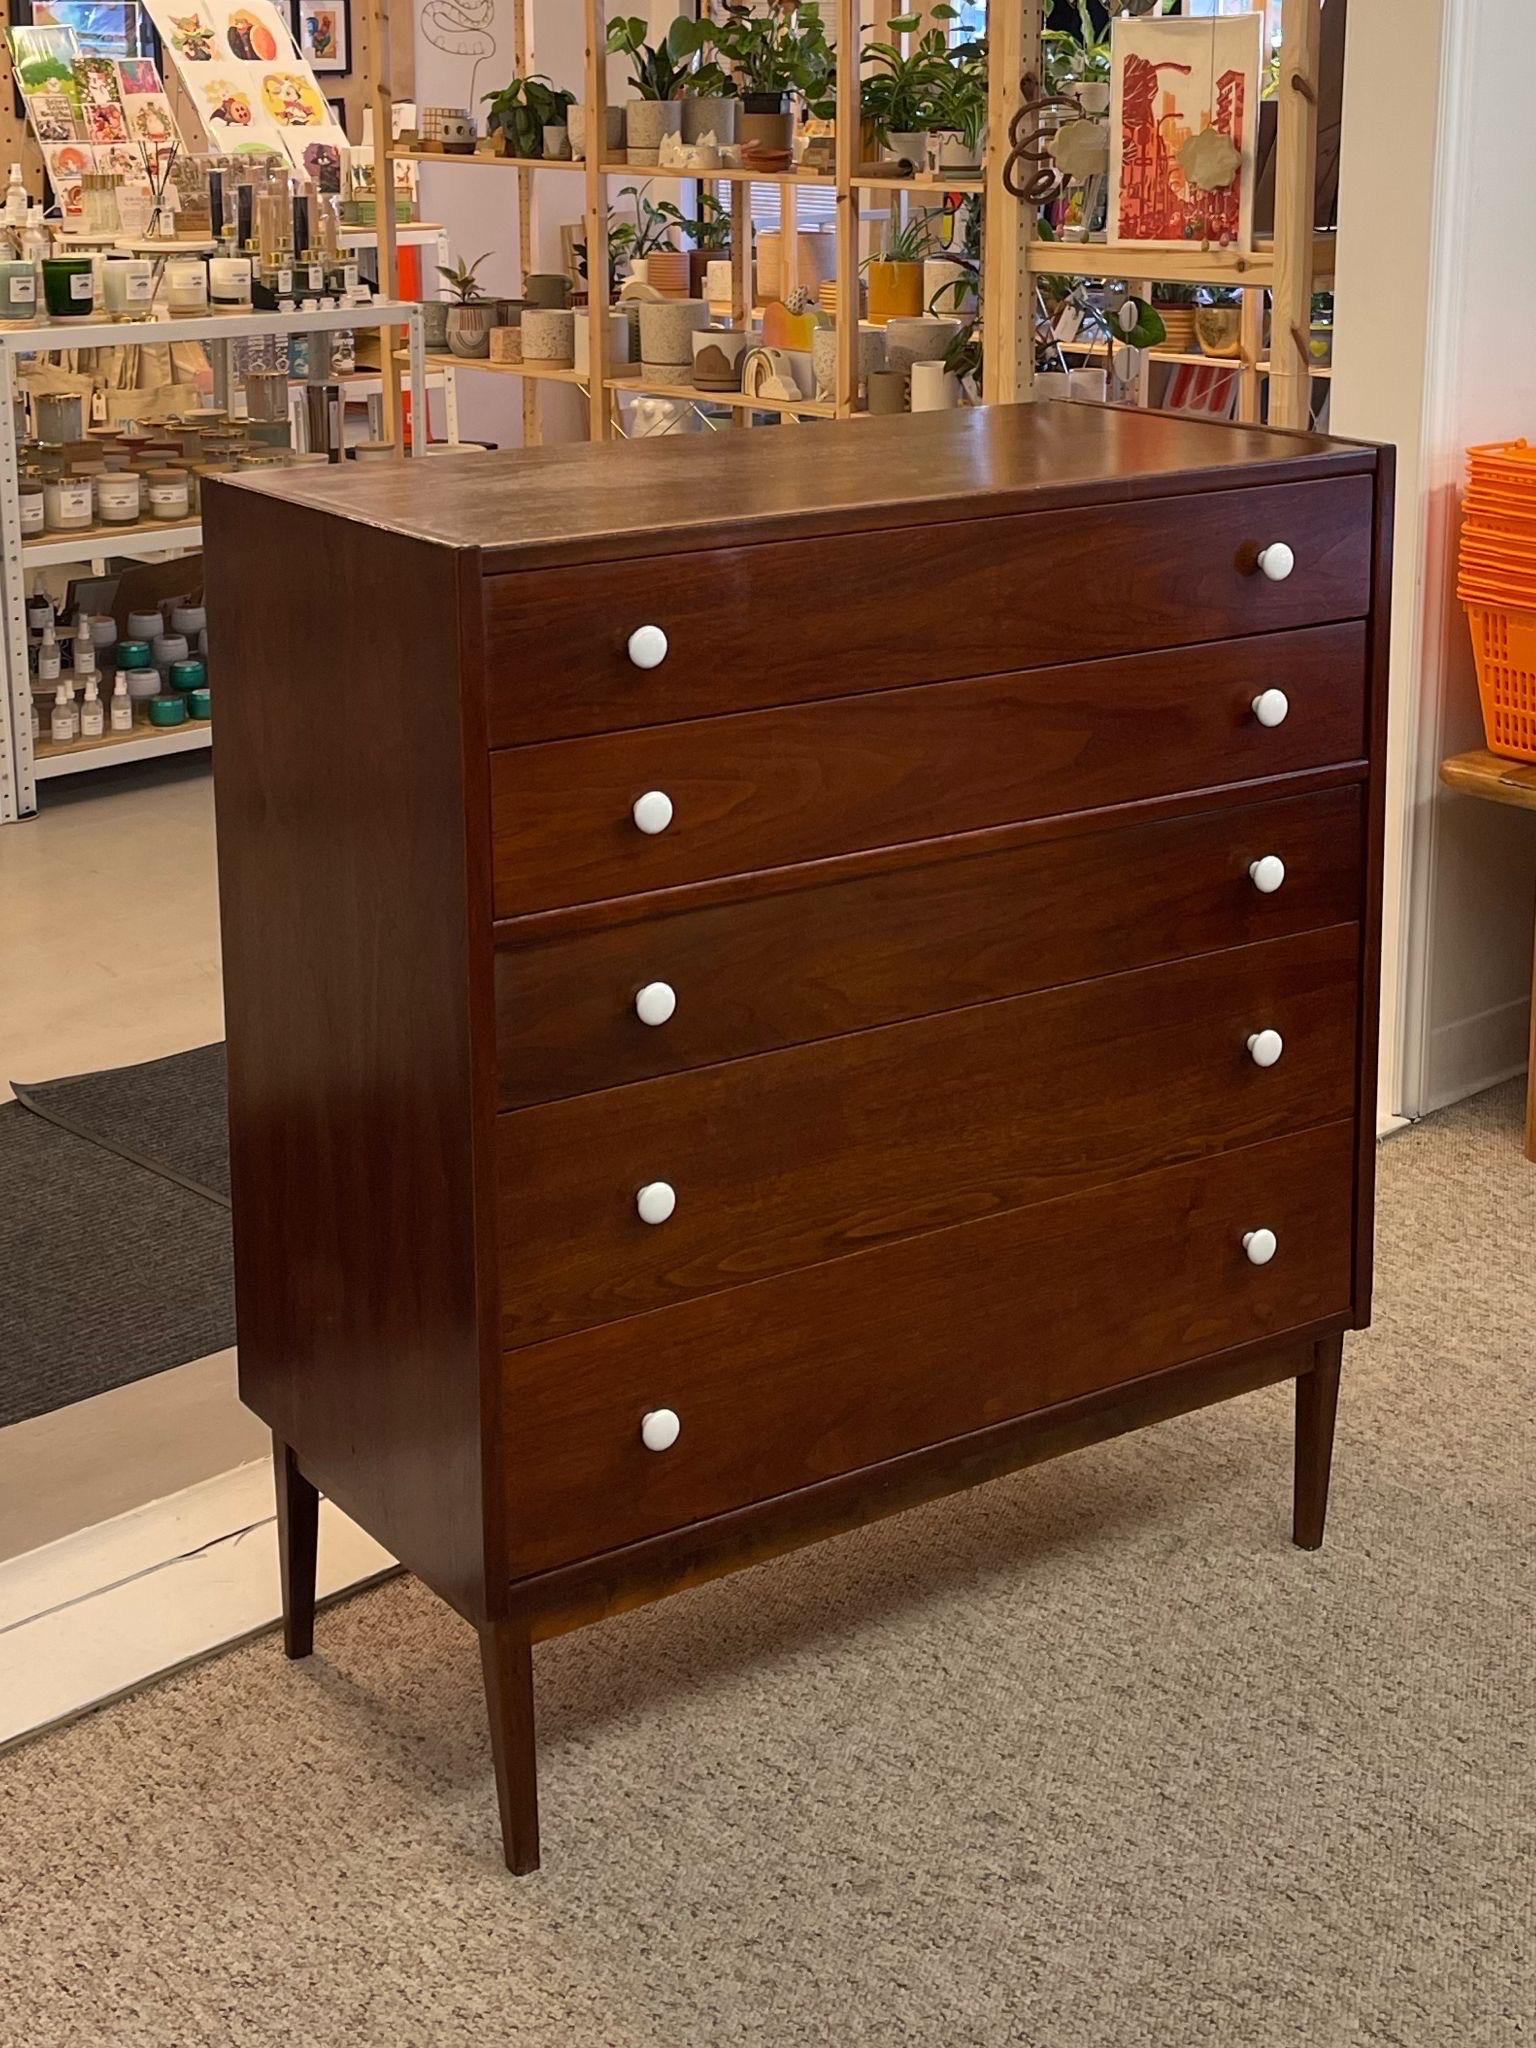 This Dresser Features 5 dovetailed drawers on tapered legs with original white toned hardware. We believed this to be a Drexel piece due to construction, design and overall feel. Buyer to Verify. Credenza is available with matching style through